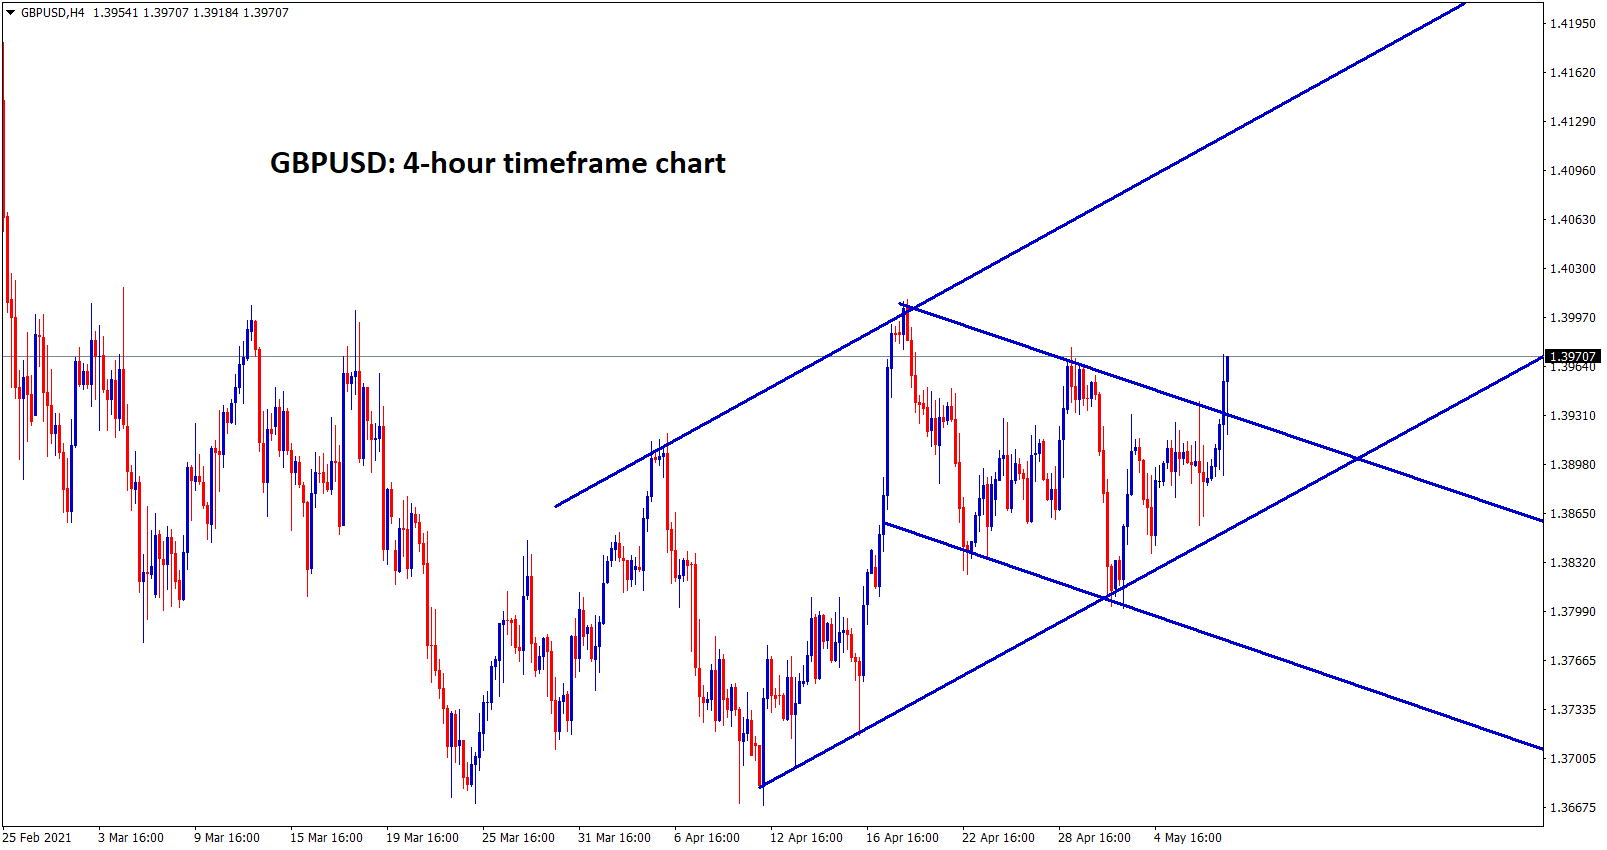 GBPUSD breaks the minor channel and starts to continue an Uptrend in the ascending channel